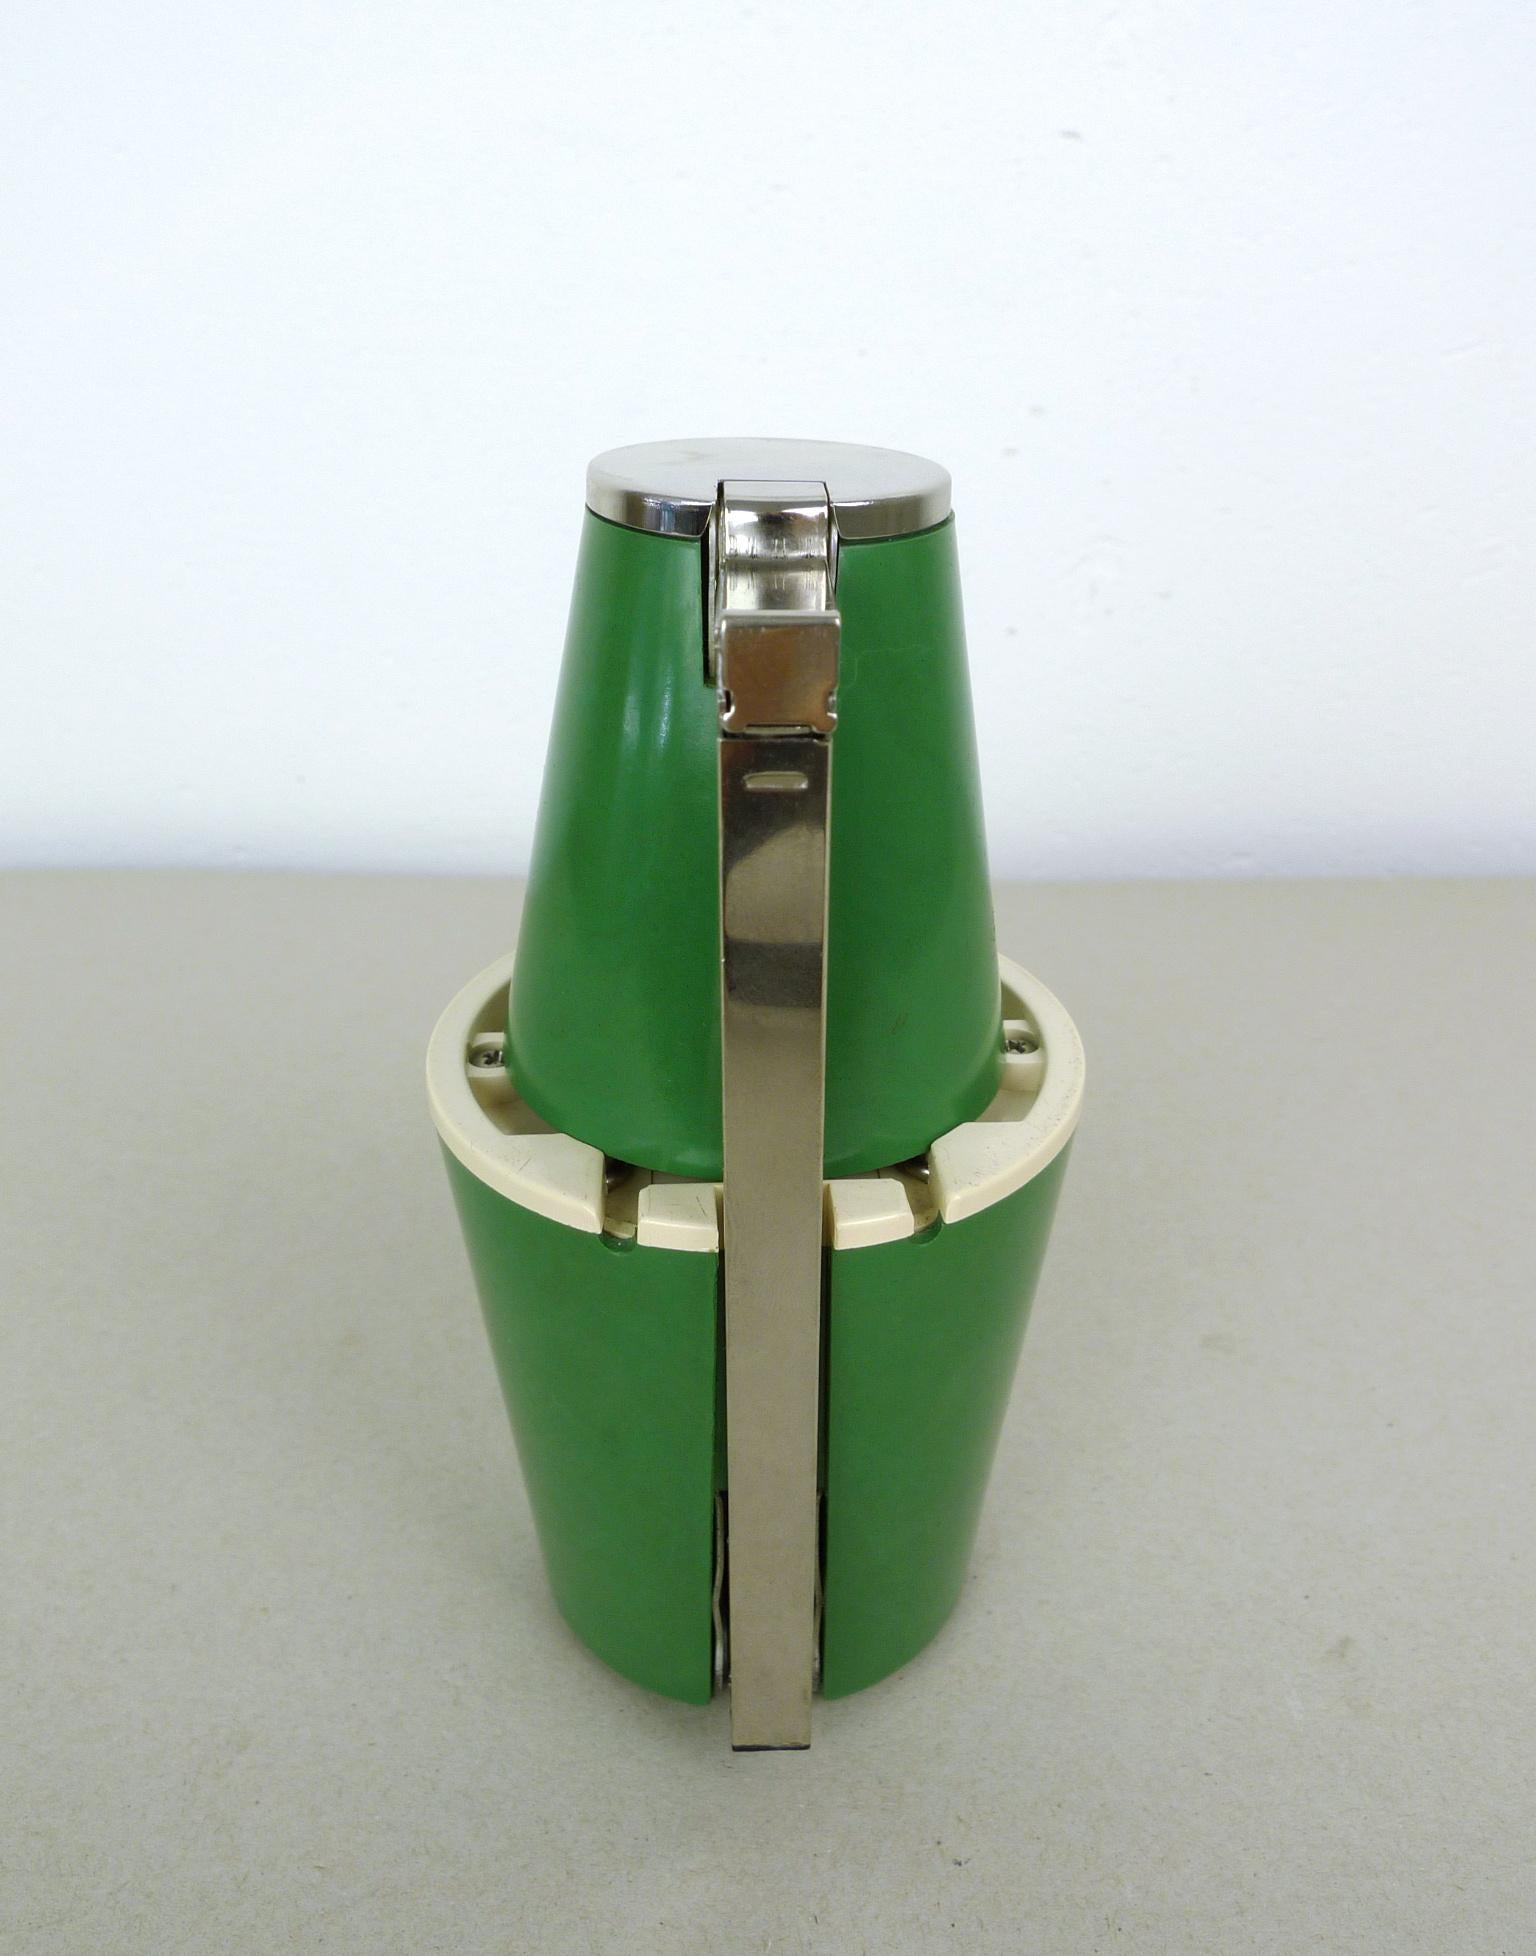 Metal Model Lampette Green Table Lamp from Eichhoff, Germany, 1960s